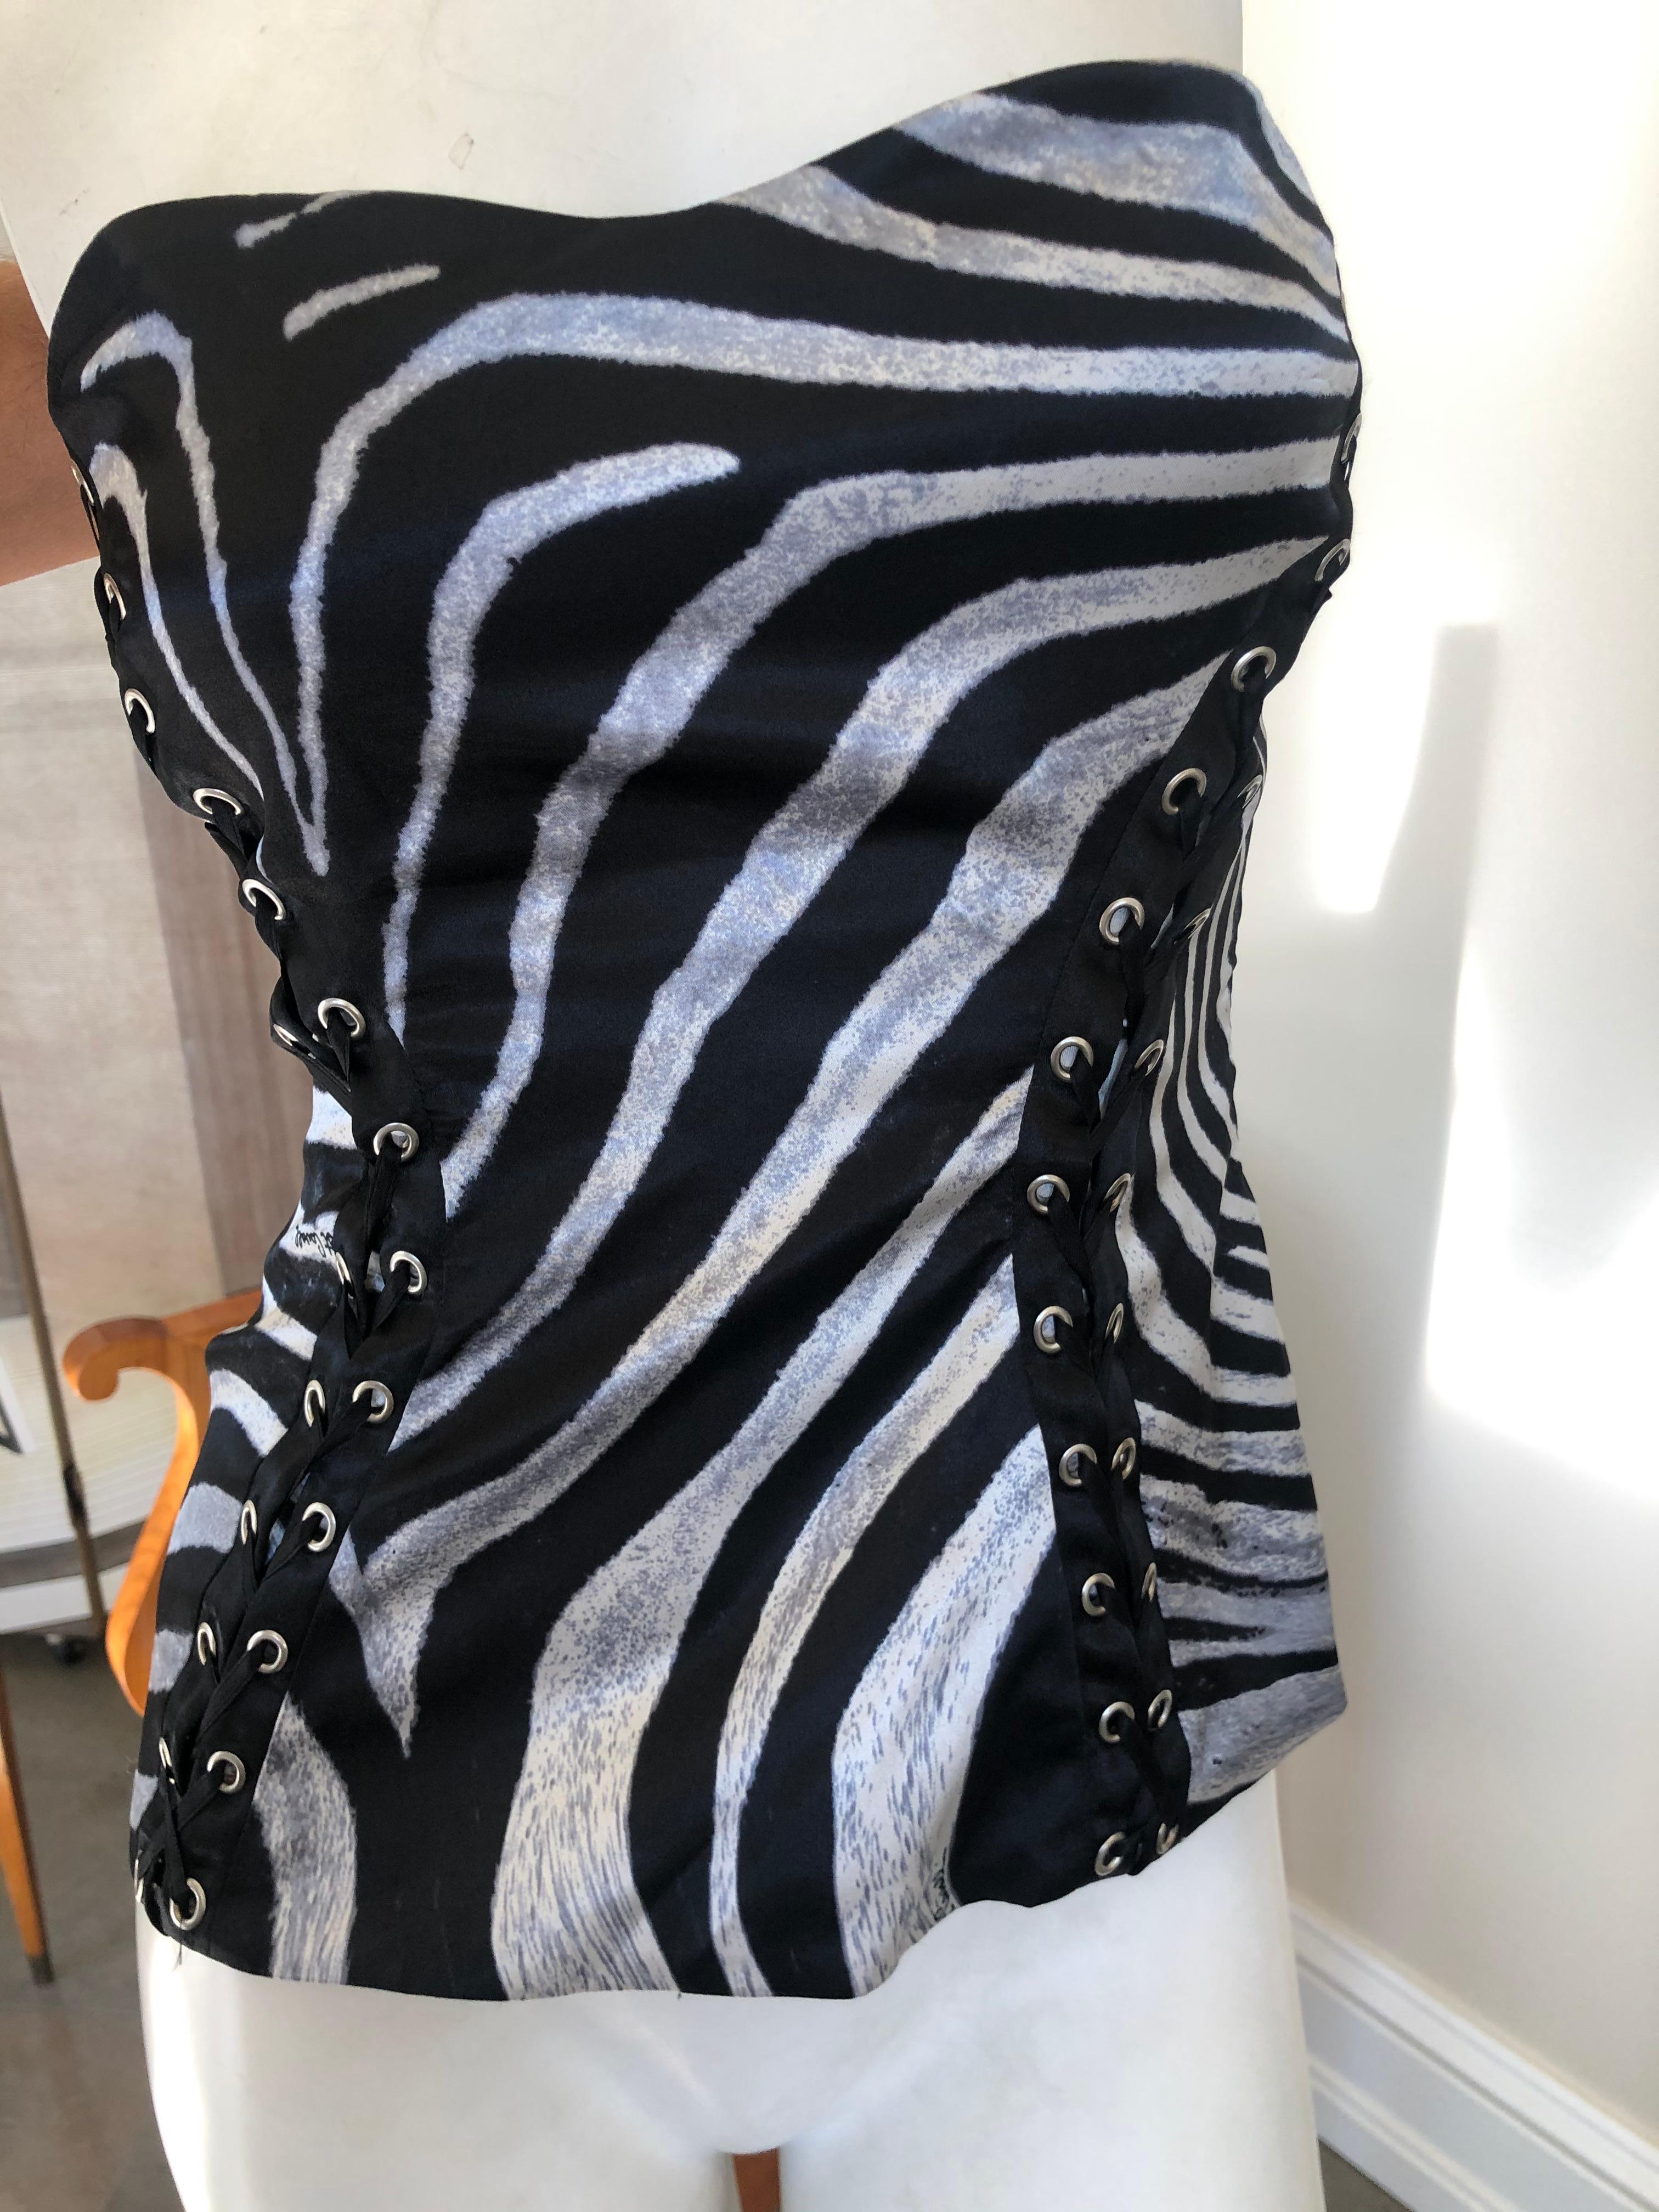 Black Roberto Cavalli for Just Cavalli Zebra Print Corset with Lace Up Details  For Sale